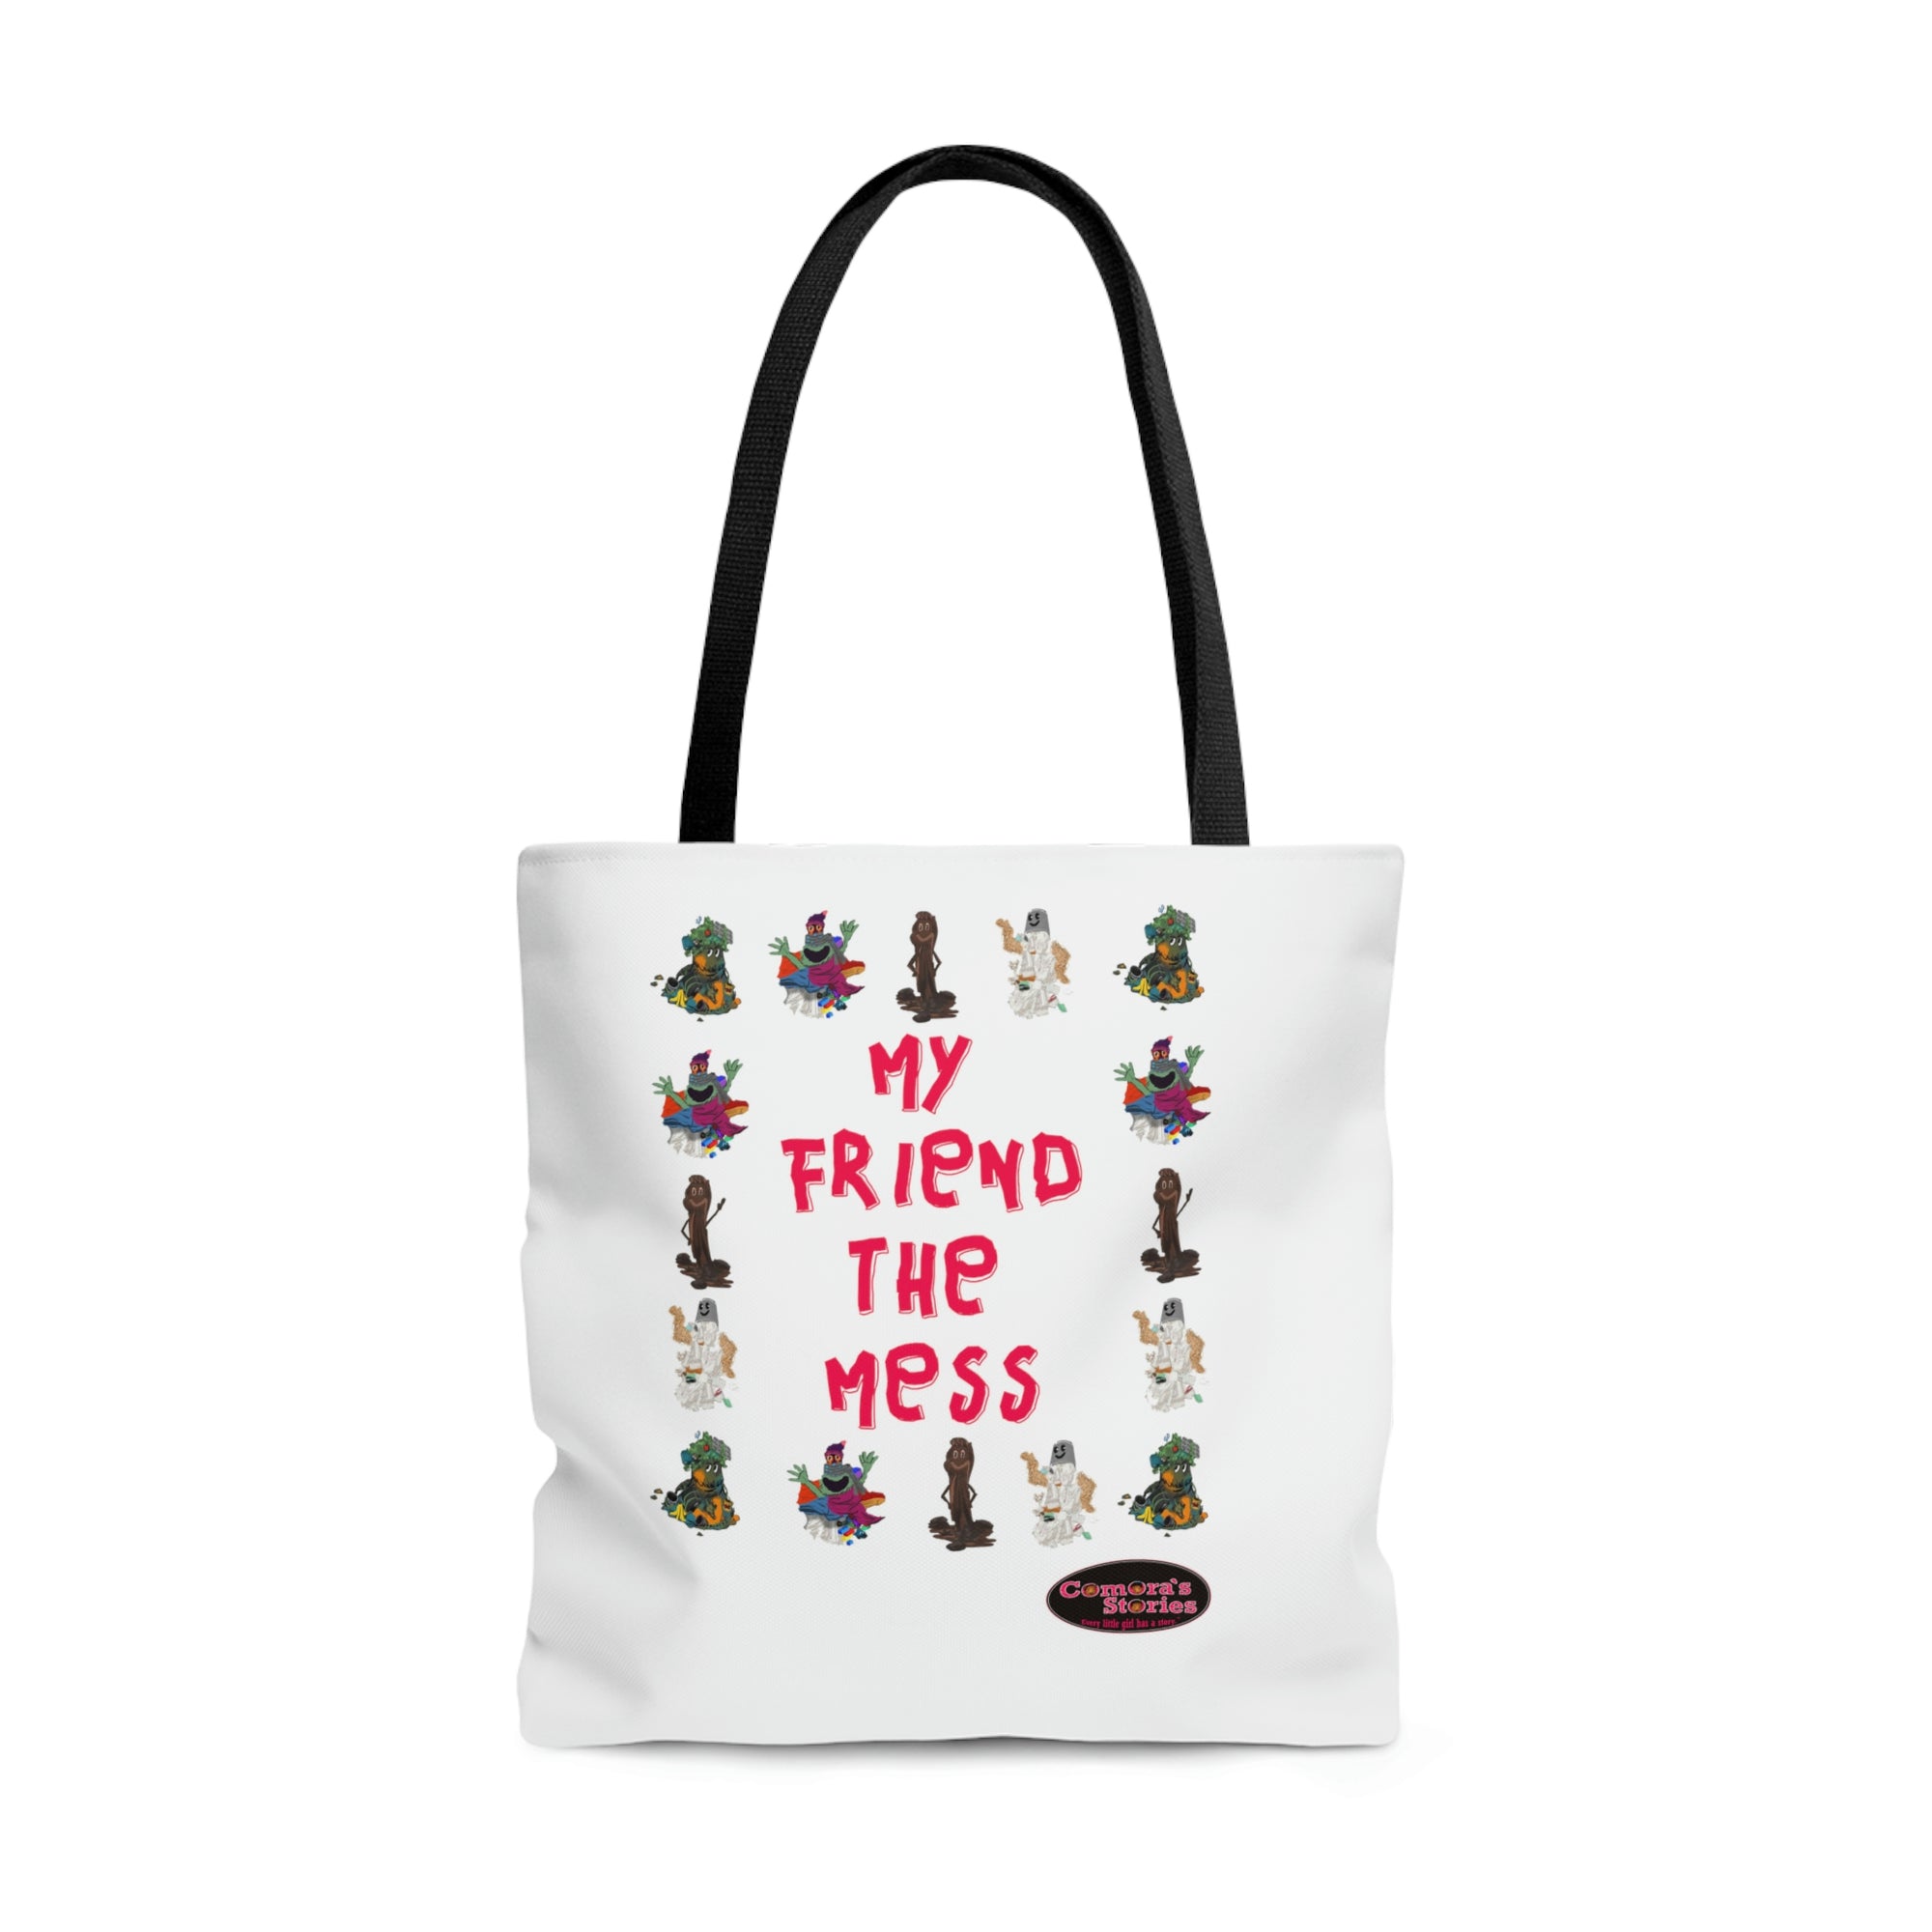 "My Friend The Mess" Tote Bag